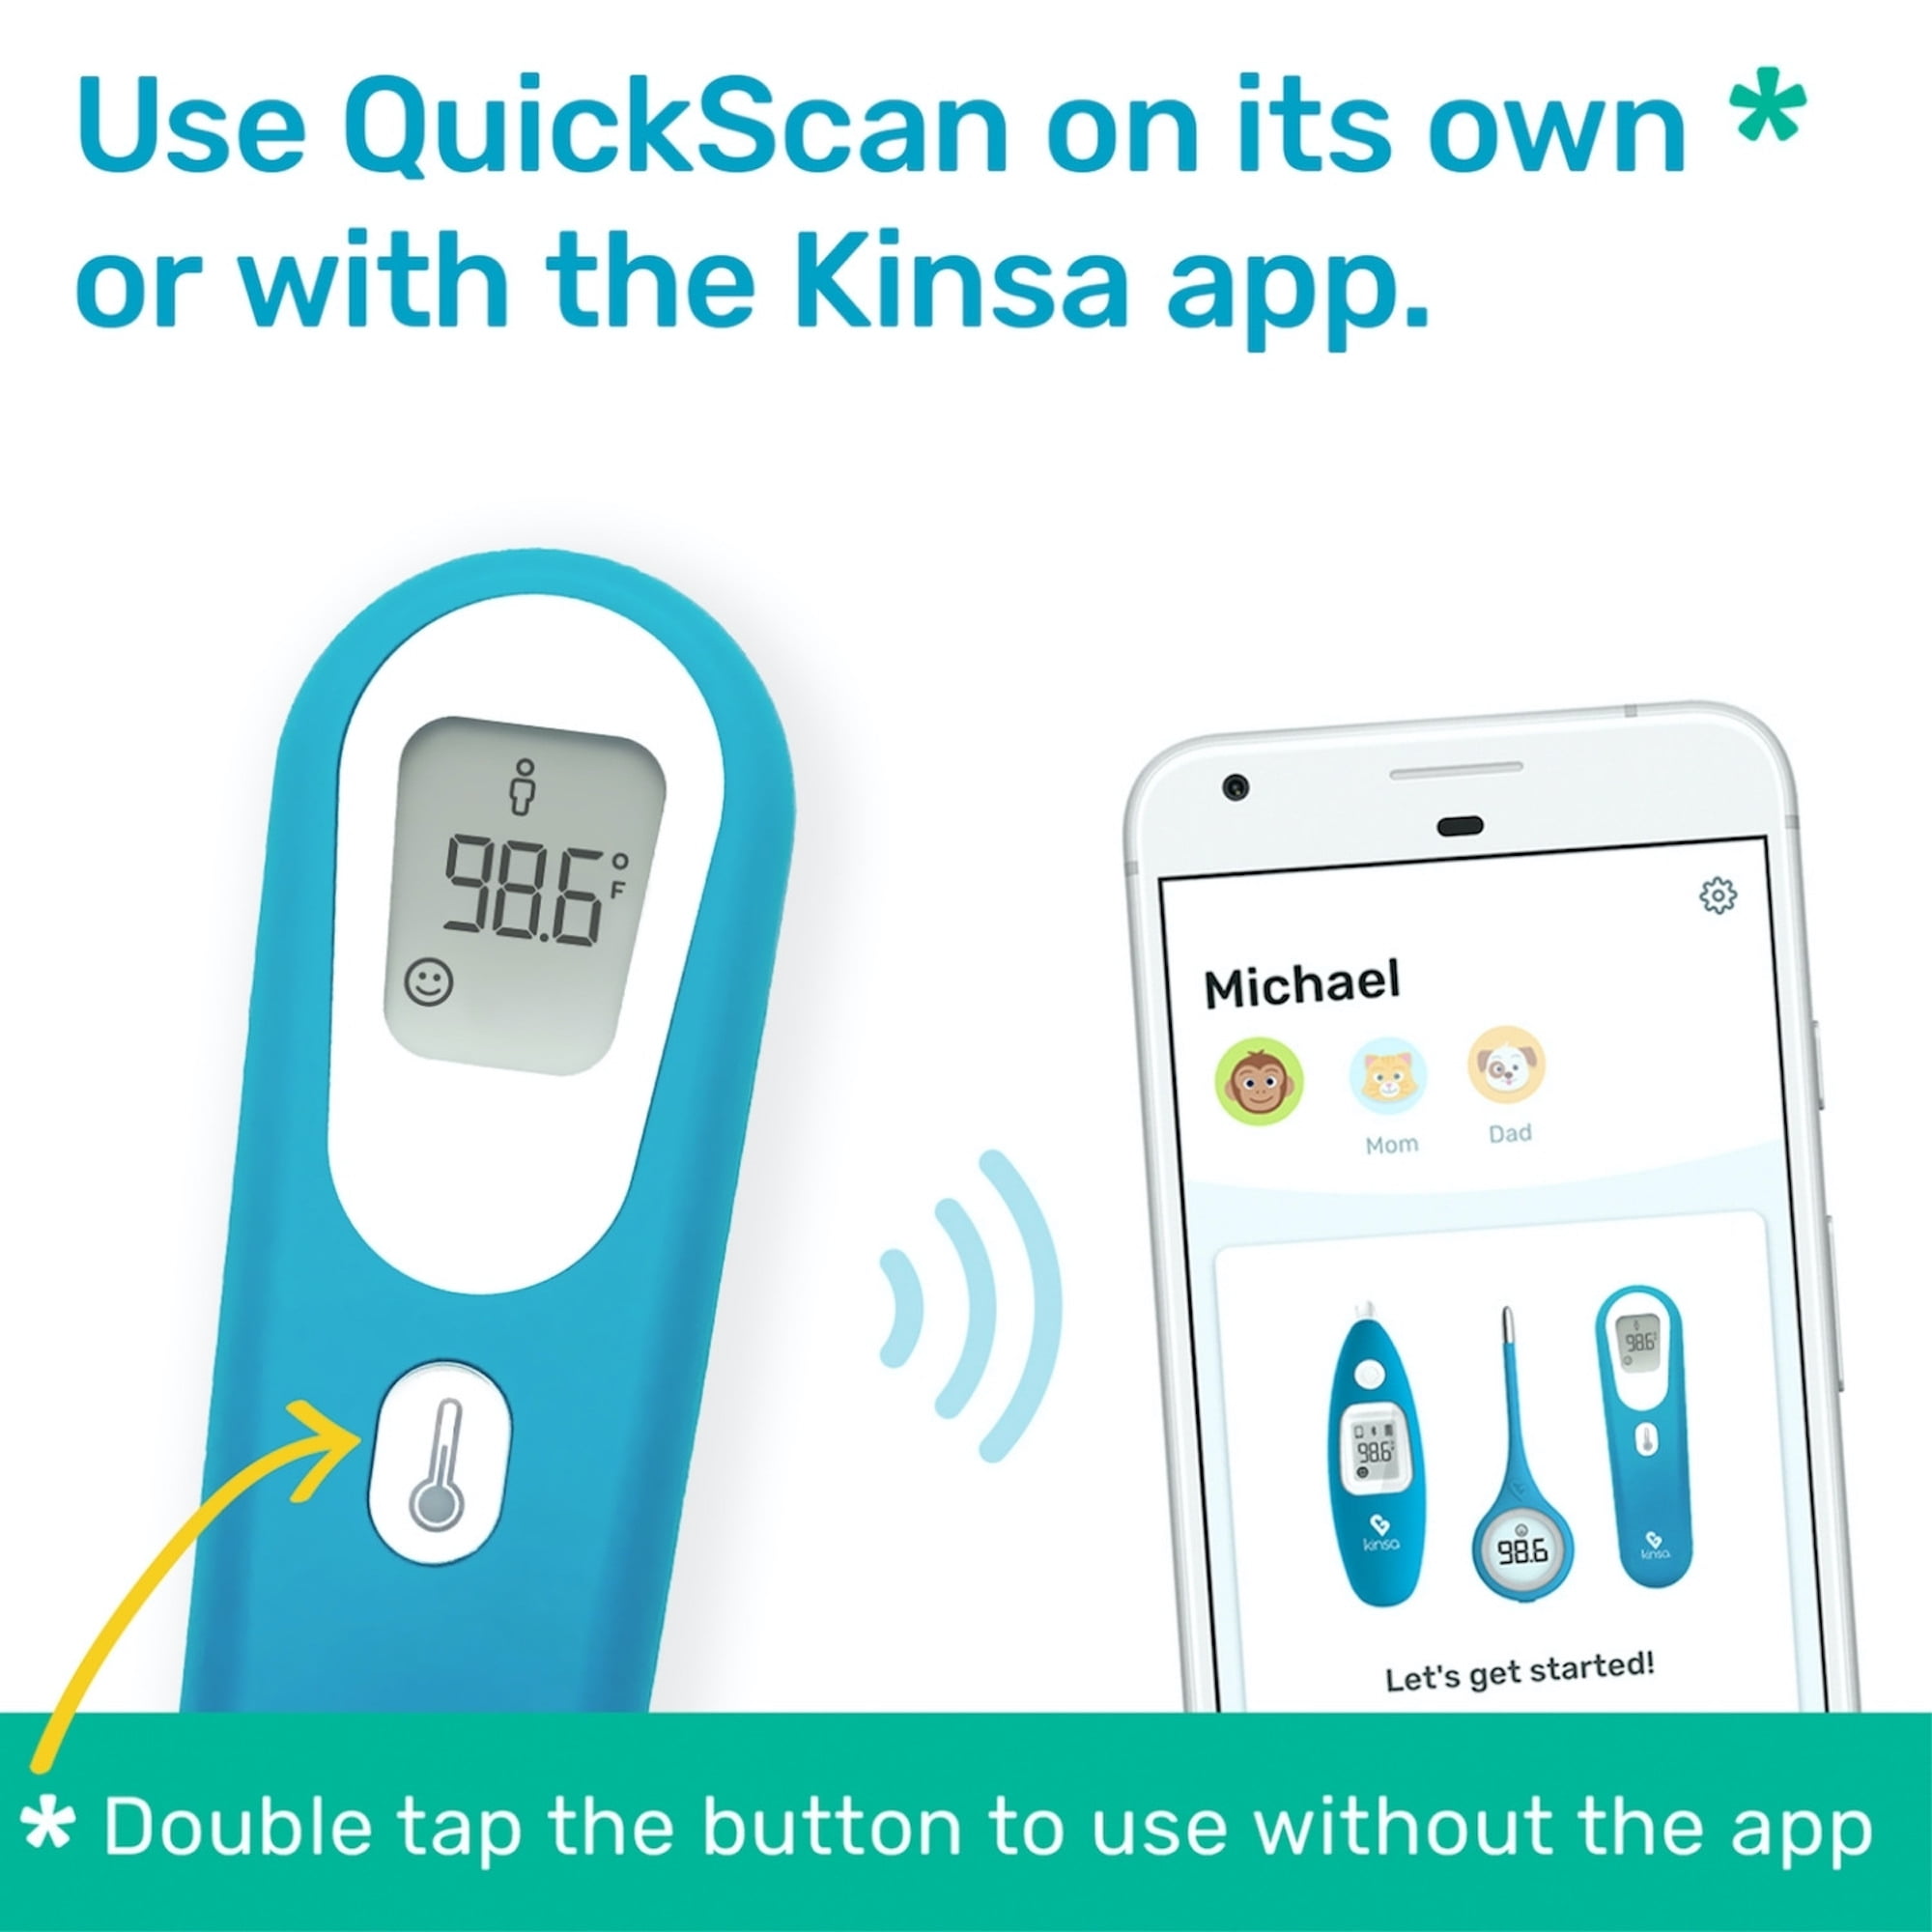 Kinsa QuickScan Smart Thermometer - No-Touch Contactless Digital